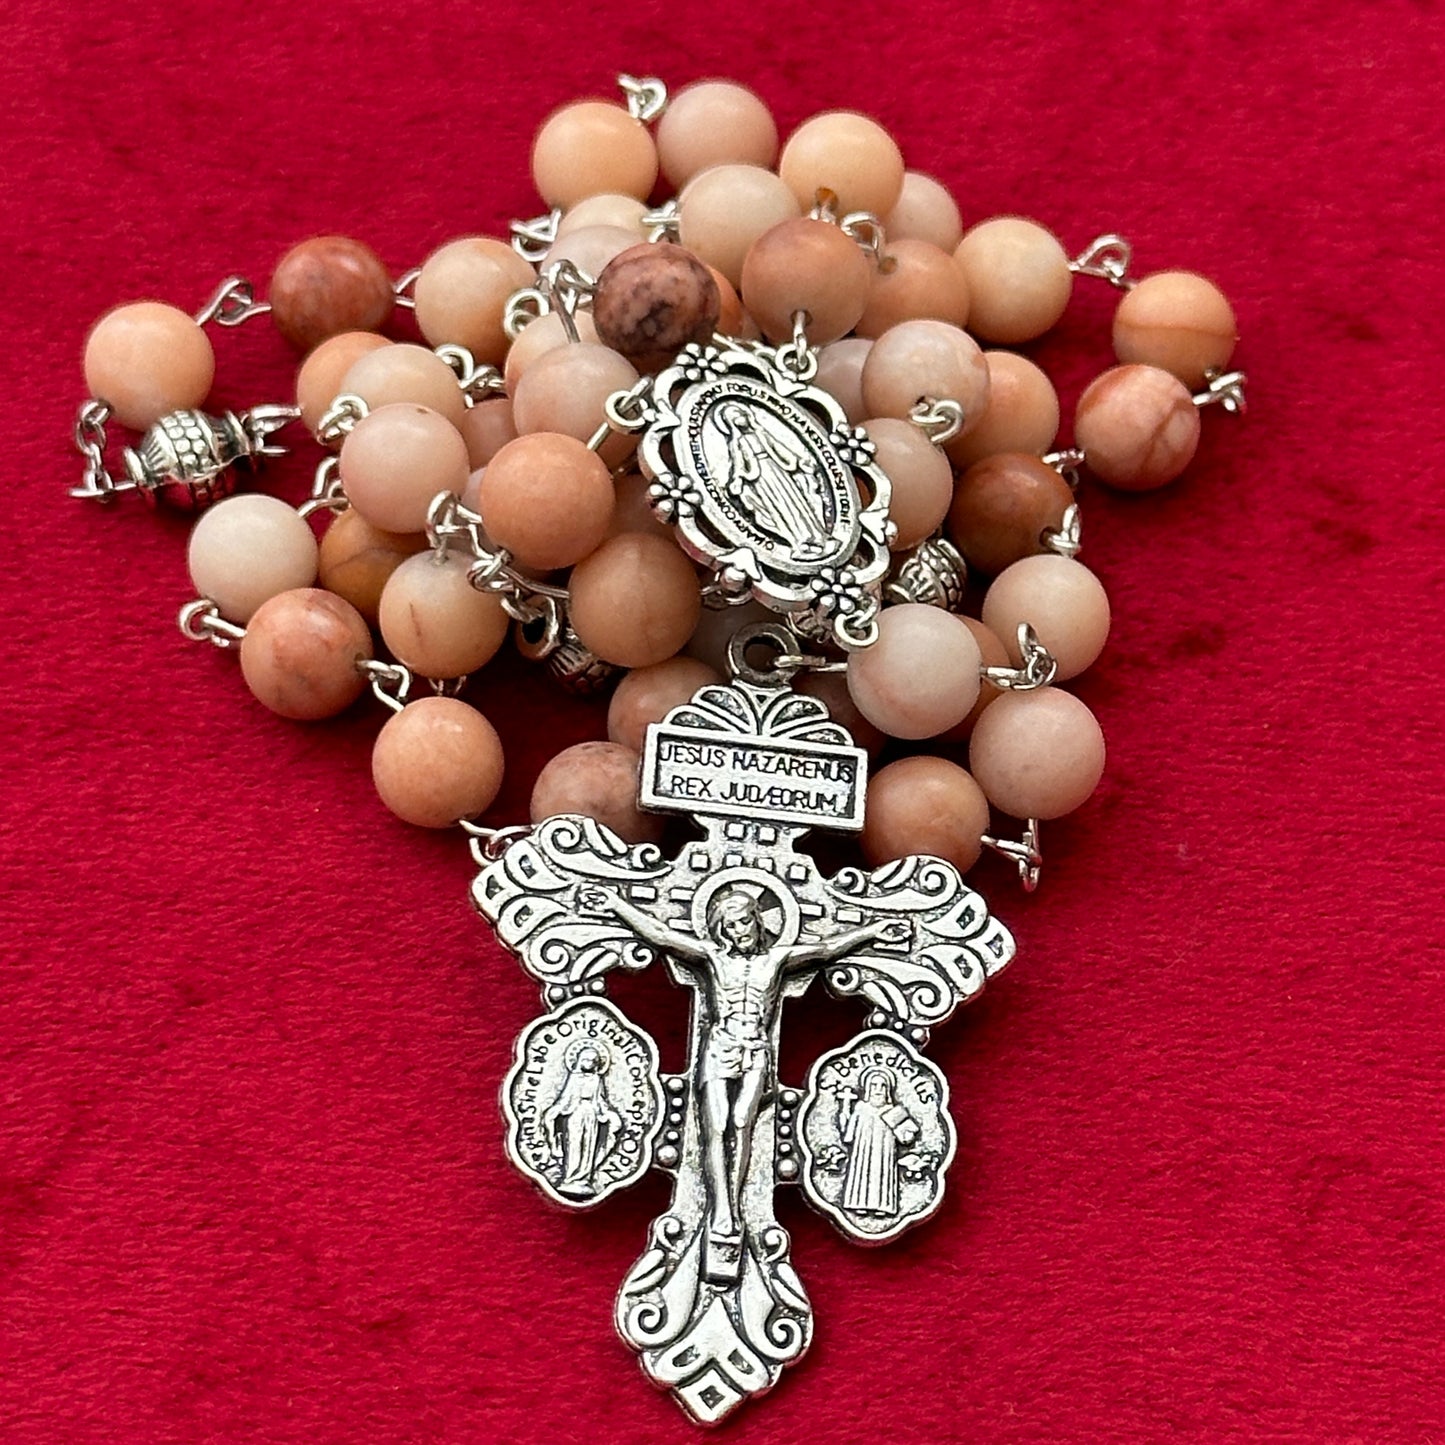 Catholic Traditional Rosary Beads Online Sale